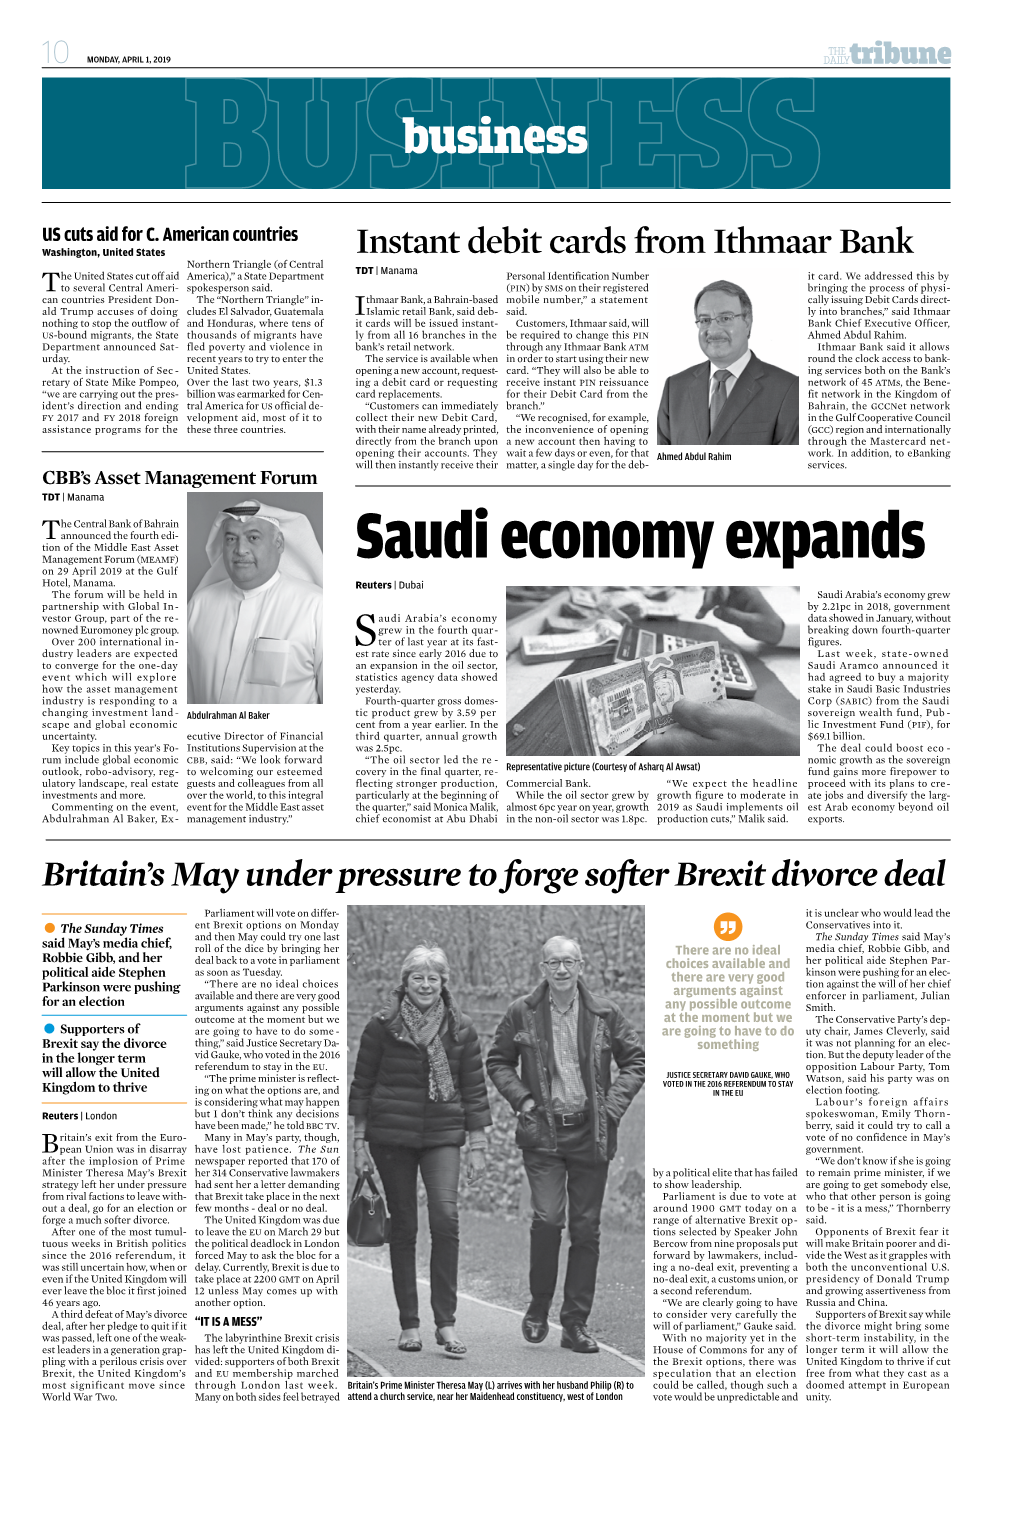 Saudi Economy Expands on 29 April 2019 at the Gulf Hotel, Manama